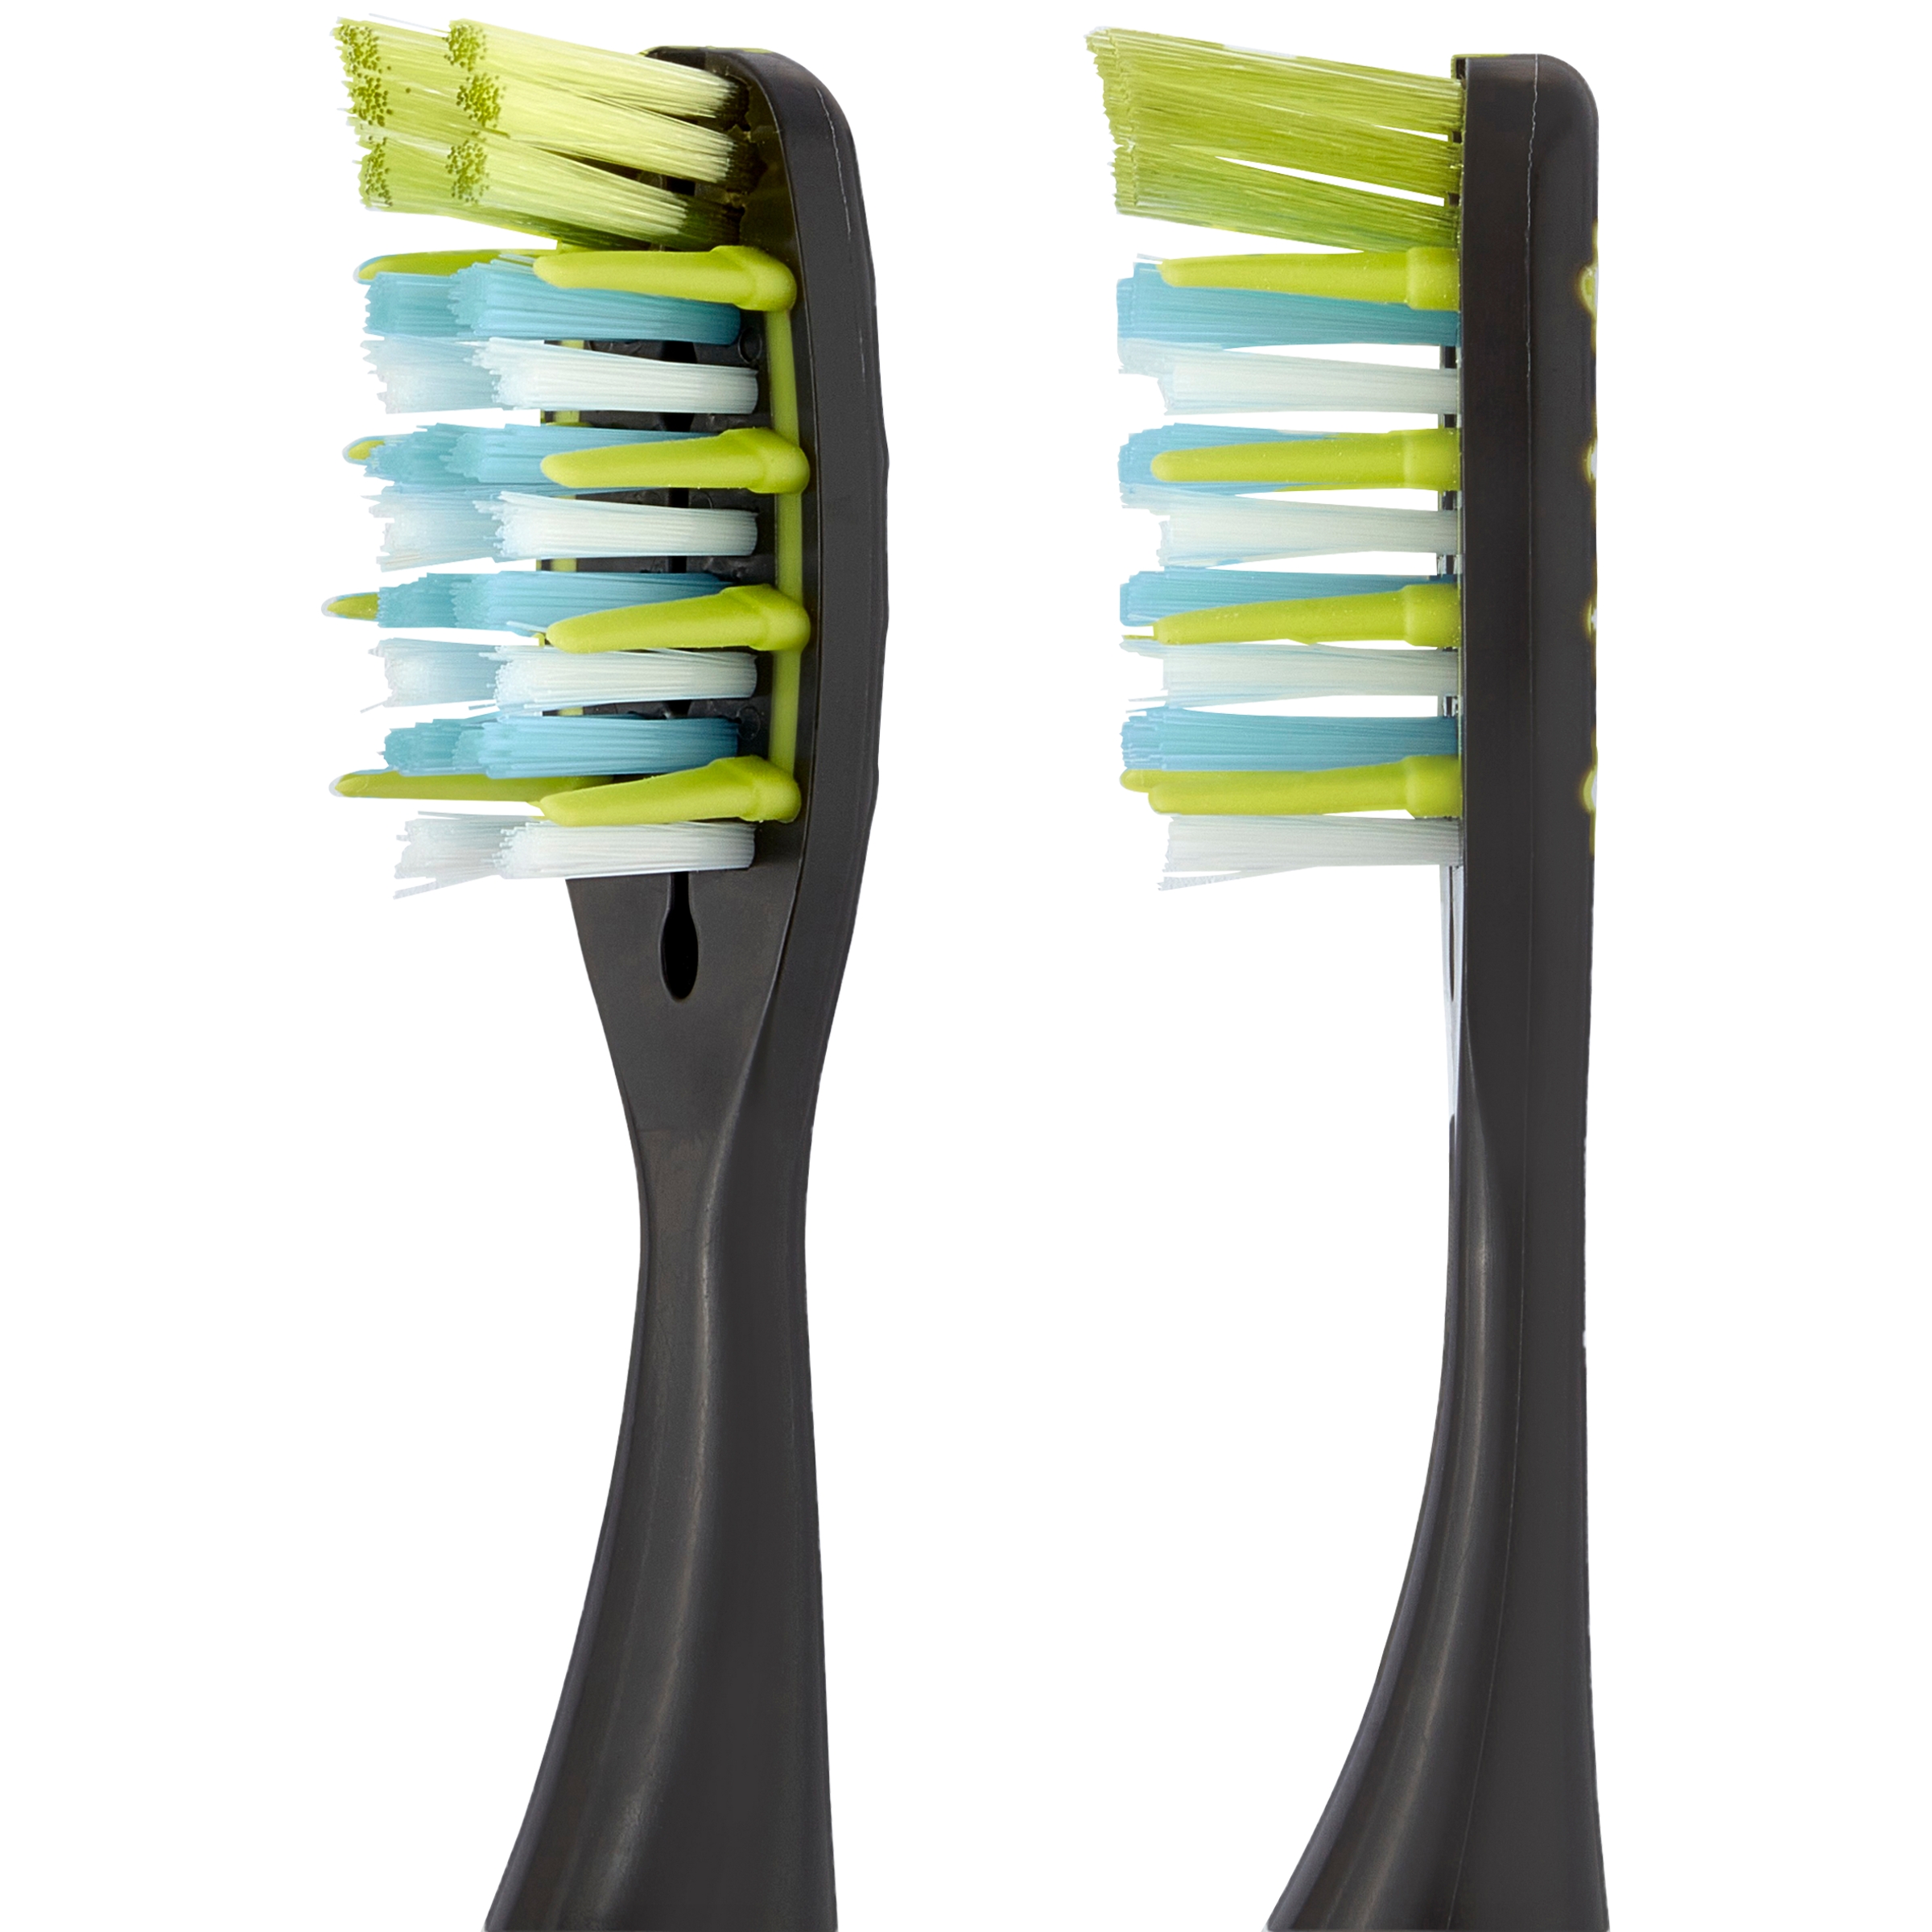 Equate Polaris Deep Cleaning VibraClean Toothbrush, Deep Cleaning Soft Bristles, Helps Remove Plaque, 2 Count - image 8 of 12